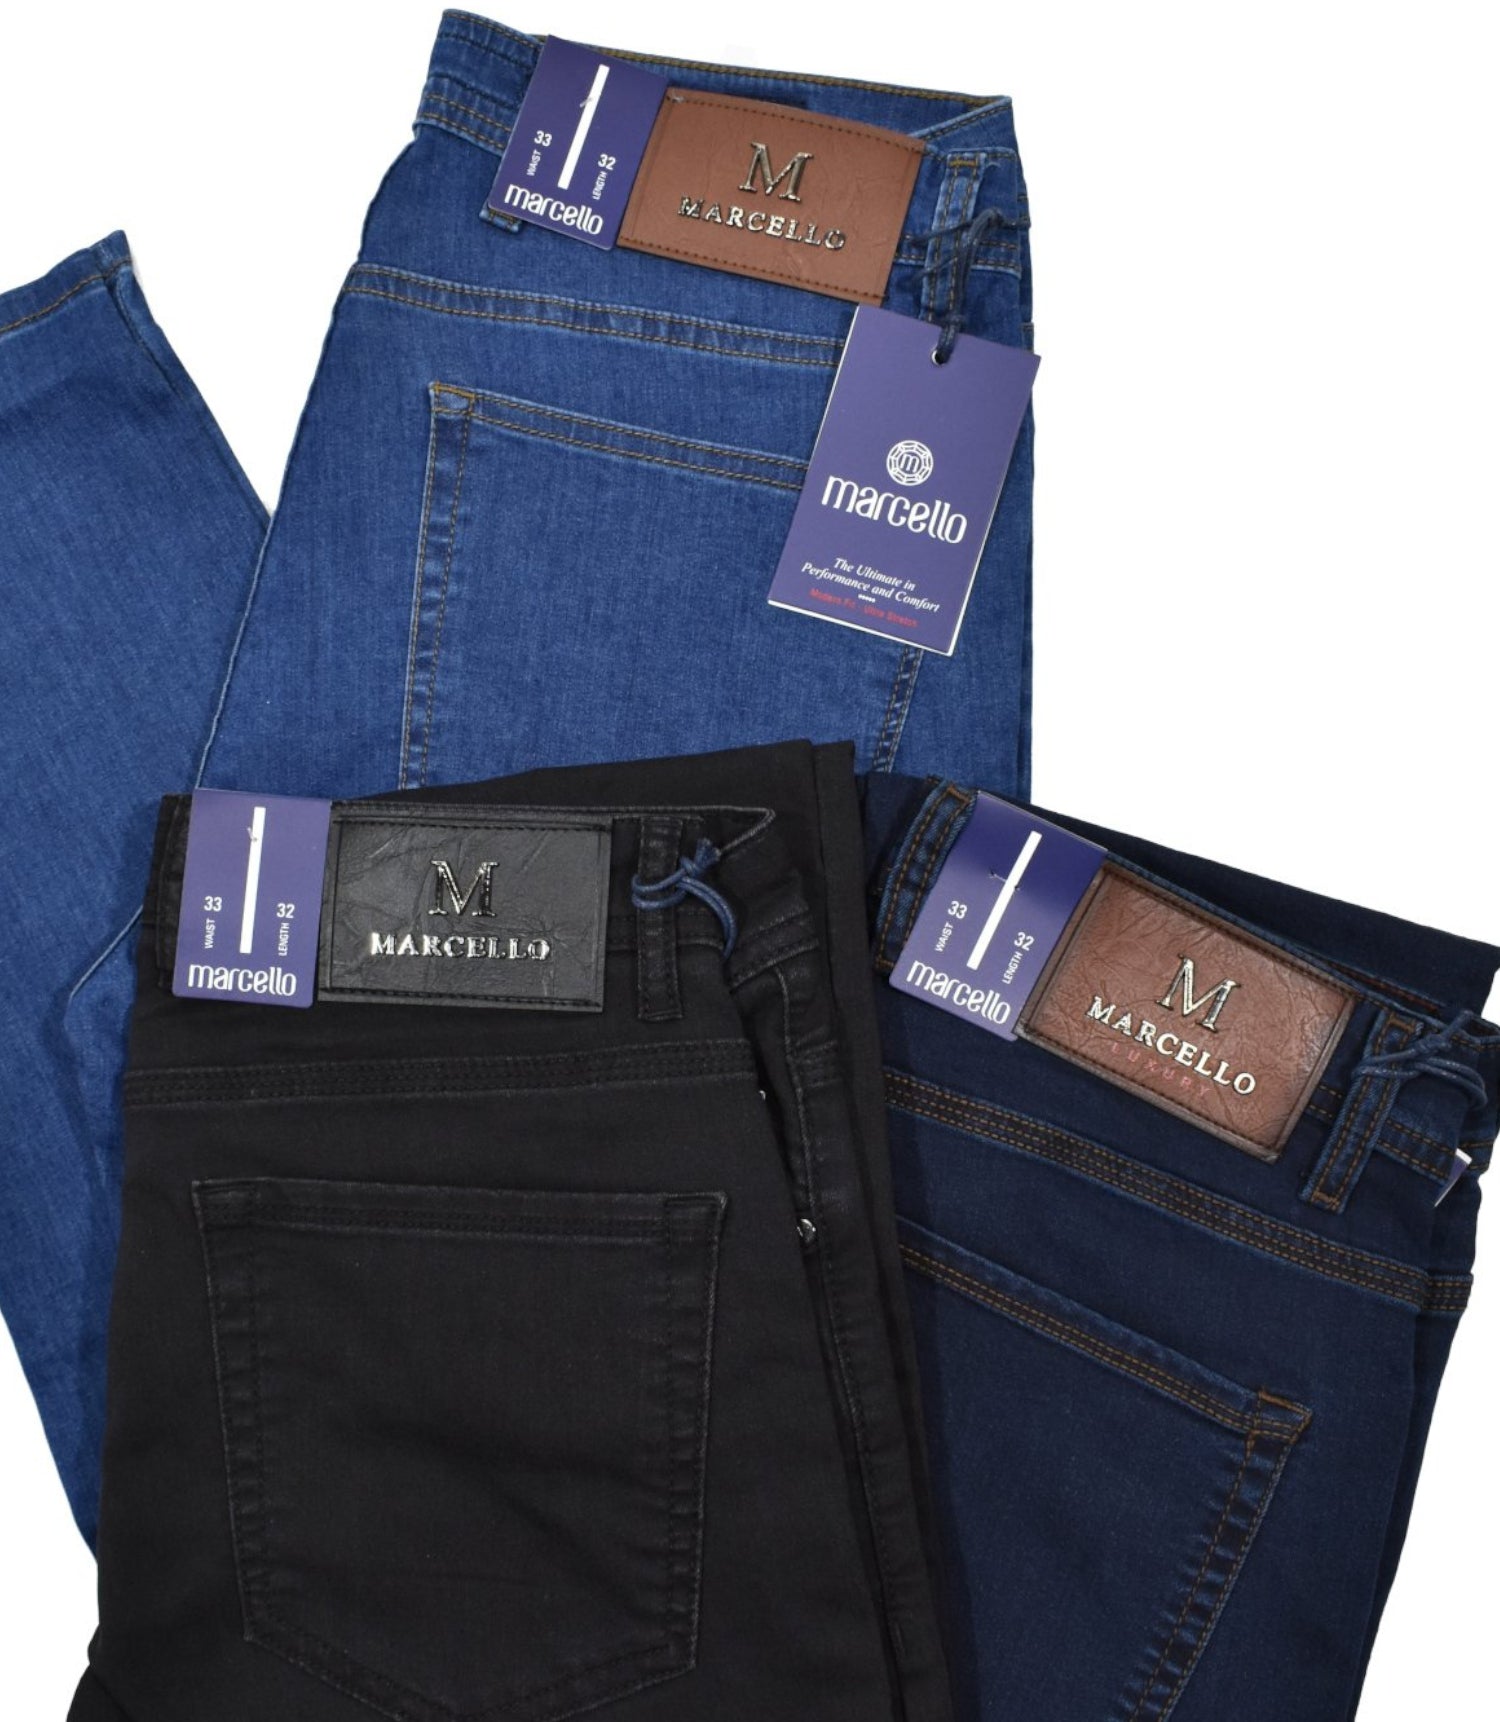 Say goodbye to stiff denim and hello to our LP27 Stretch Lightweight Denim. These jeans feature an ultra-light cotton-elastin fabric that moves with your body for exceptional comfort. The&nbsp;slimmer fit offers a&nbsp;contemporary leg and a relaxed look you'll love! Amazingly comfortable and stylish - what more could you want? A Marcello Exclusive.